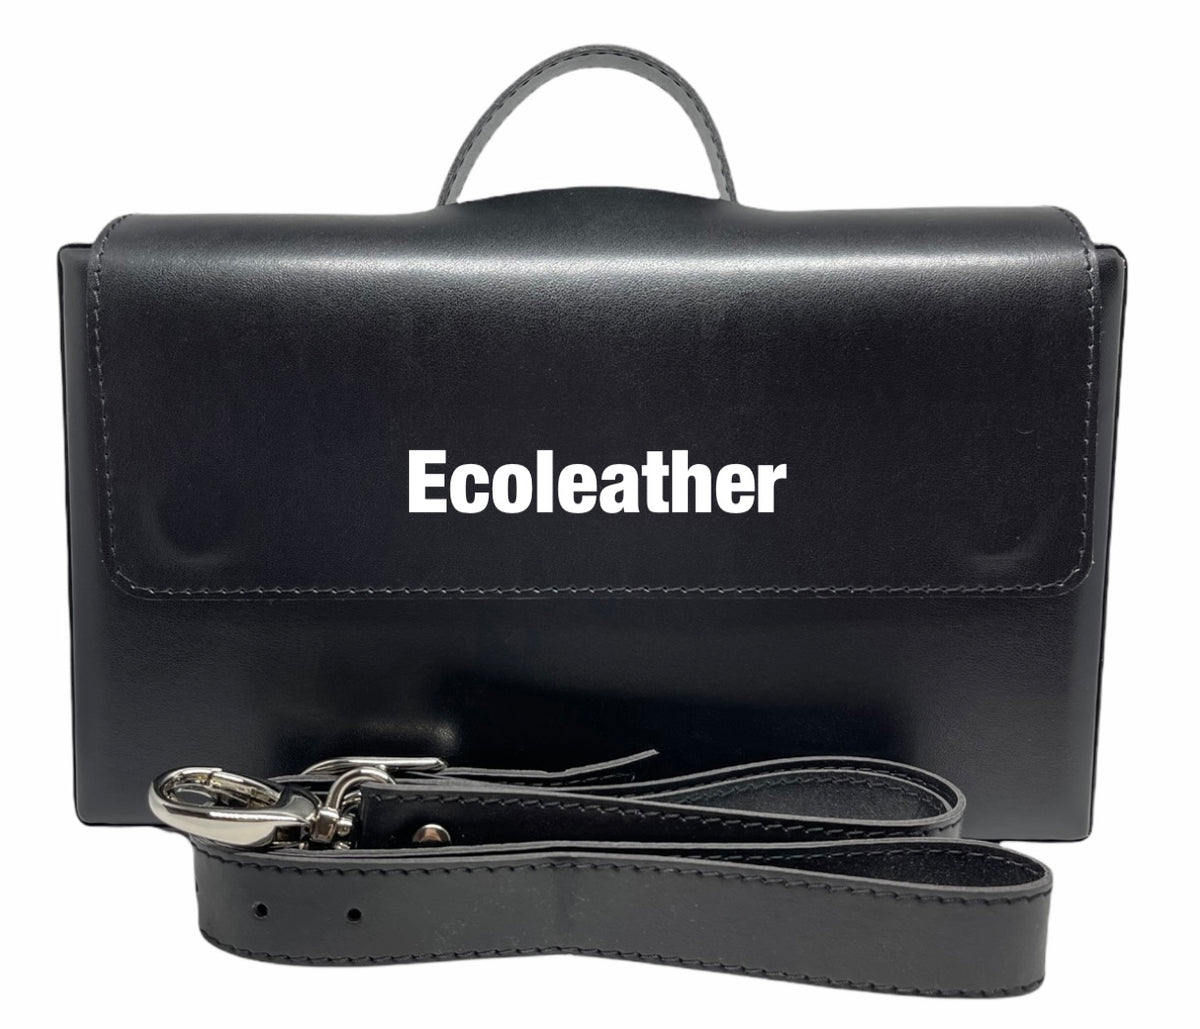 Ecocase Classic Briefcase BLACK, Ecoleather  with silver or gold locks and shoulder strap